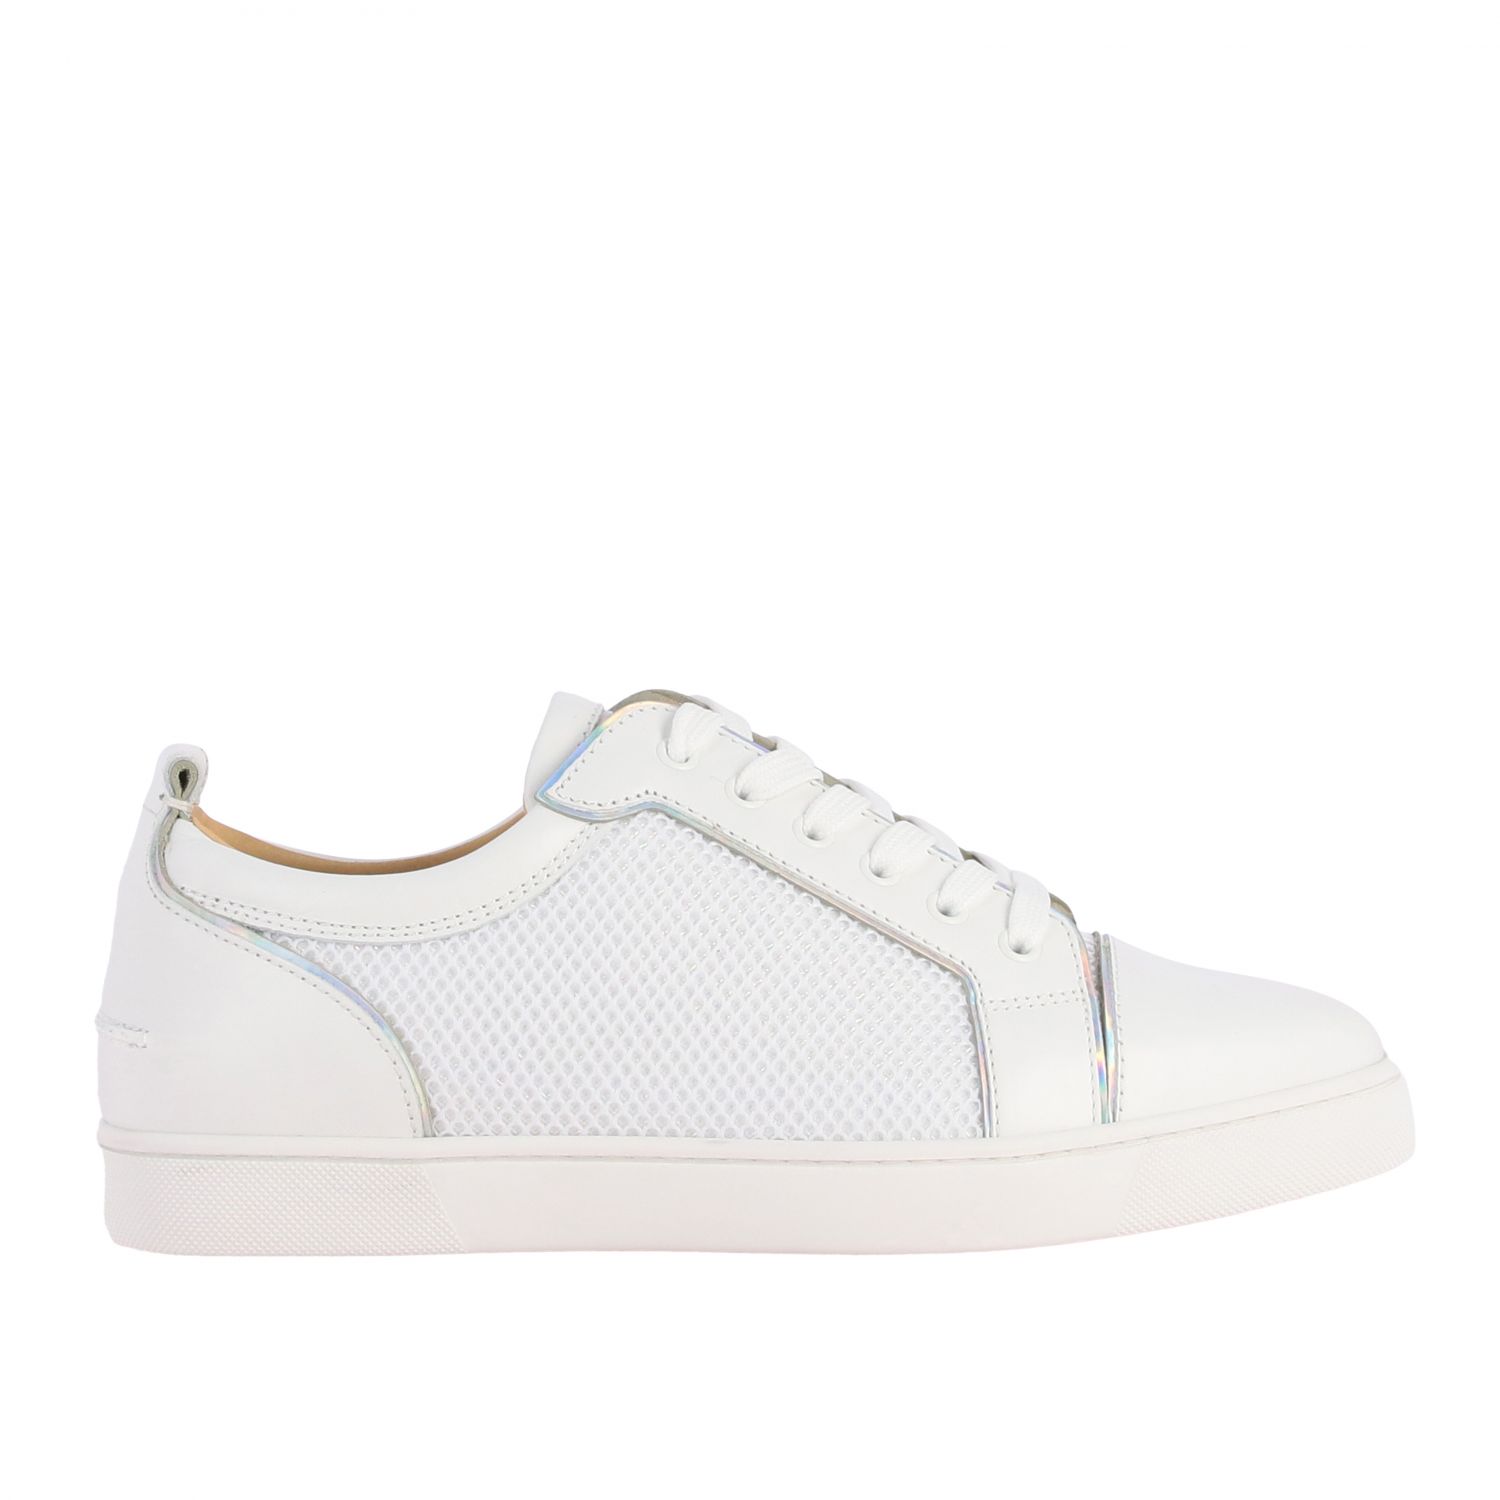 mens white christian louboutin trainers